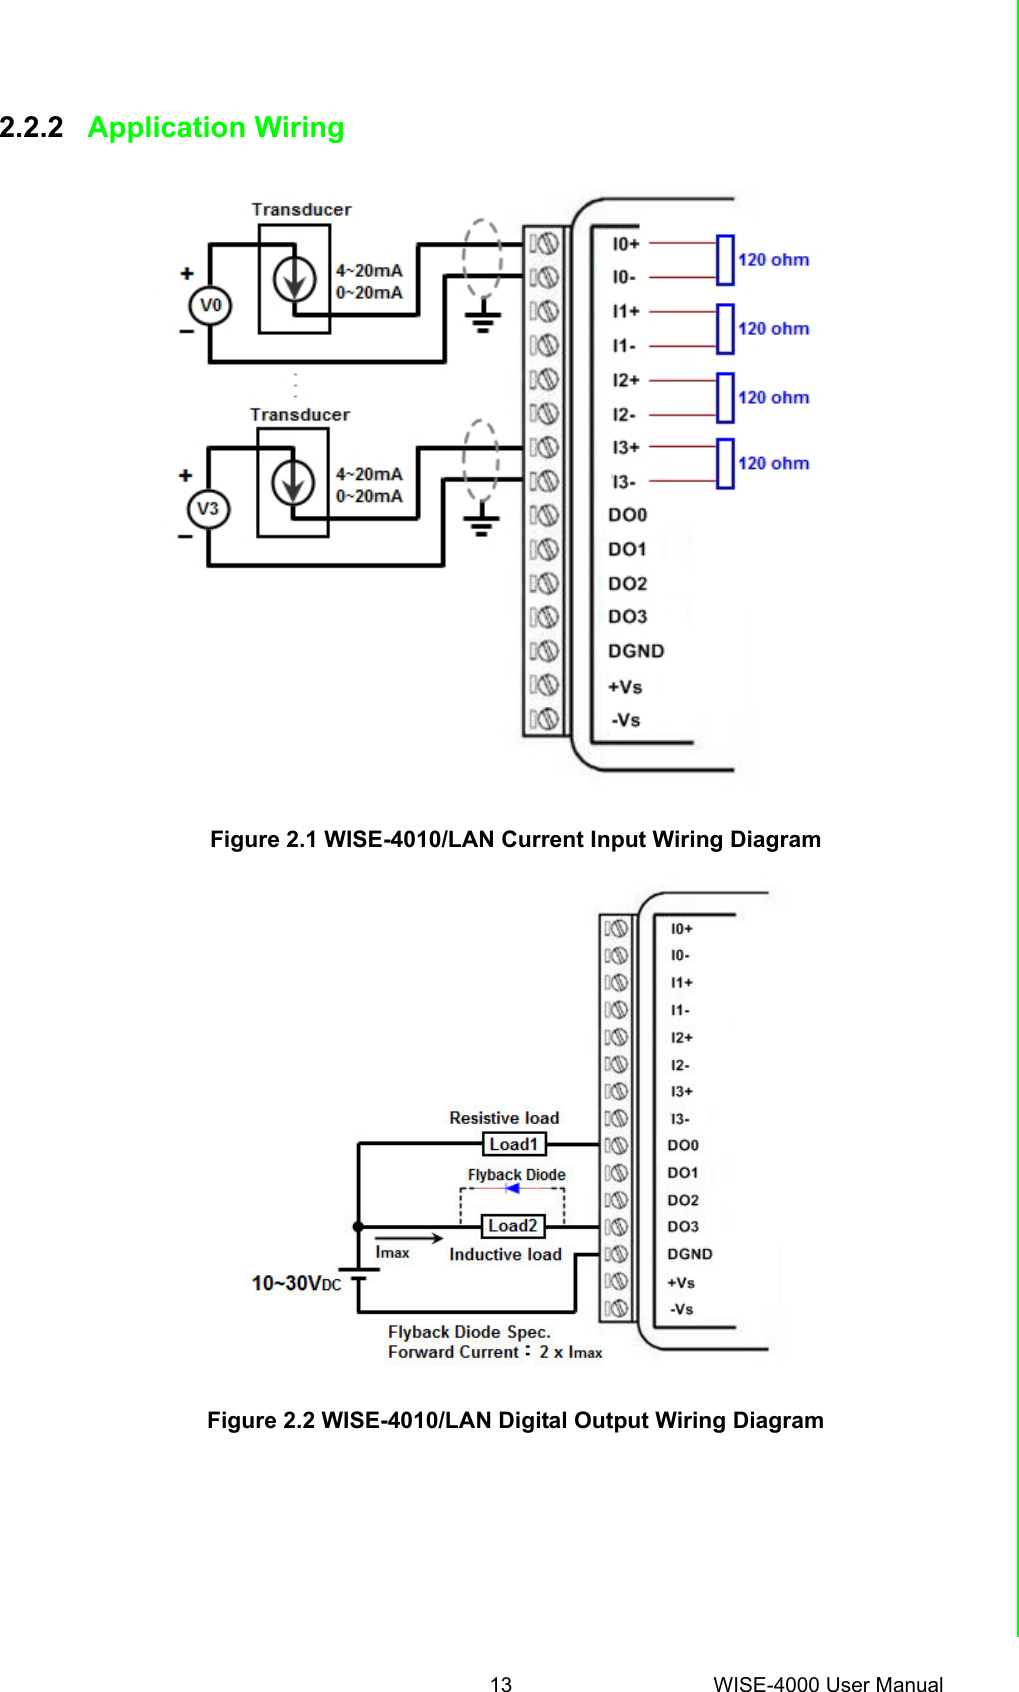 13 WISE-4000 User ManualChapter 2 Product Specifications2.2.2 Application WiringFigure 2.1 WISE-4010/LAN Current Input Wiring DiagramFigure 2.2 WISE-4010/LAN Digital Output Wiring Diagram